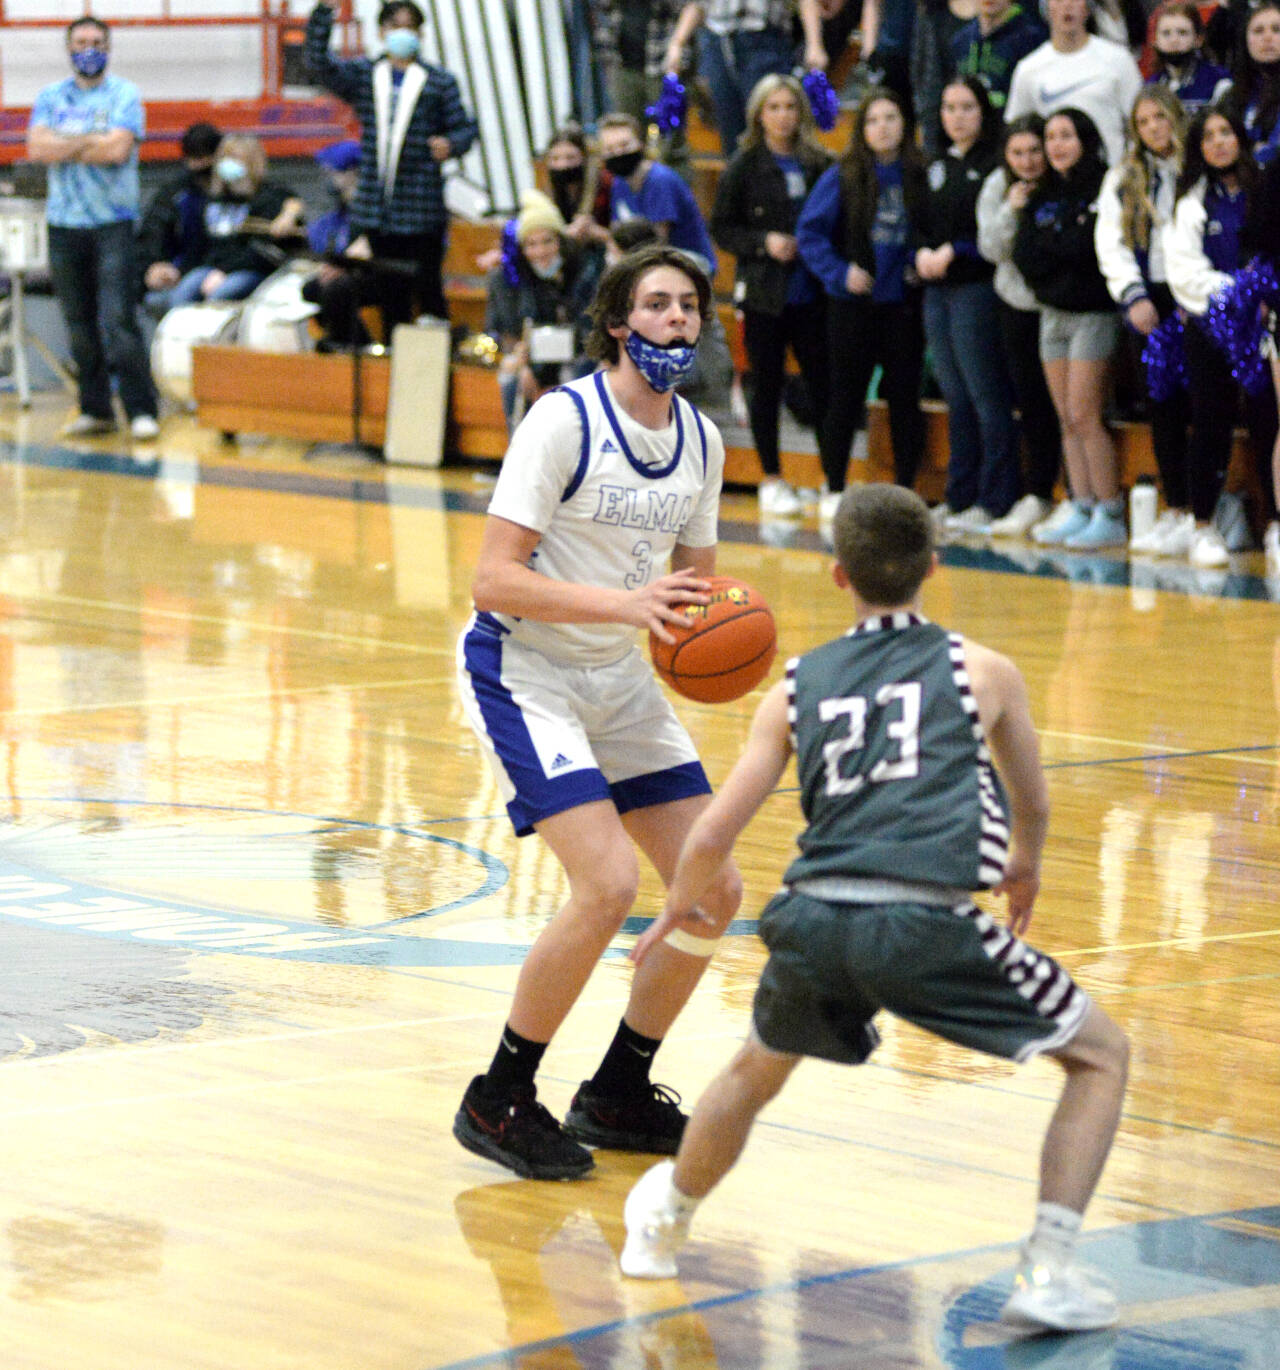 RYAN SPARKS | THE DAILY WORLD Logan Witt (3) scored 13 points for Elma in a 57-51 loss to Montesano on Tuesday at Elma High School.